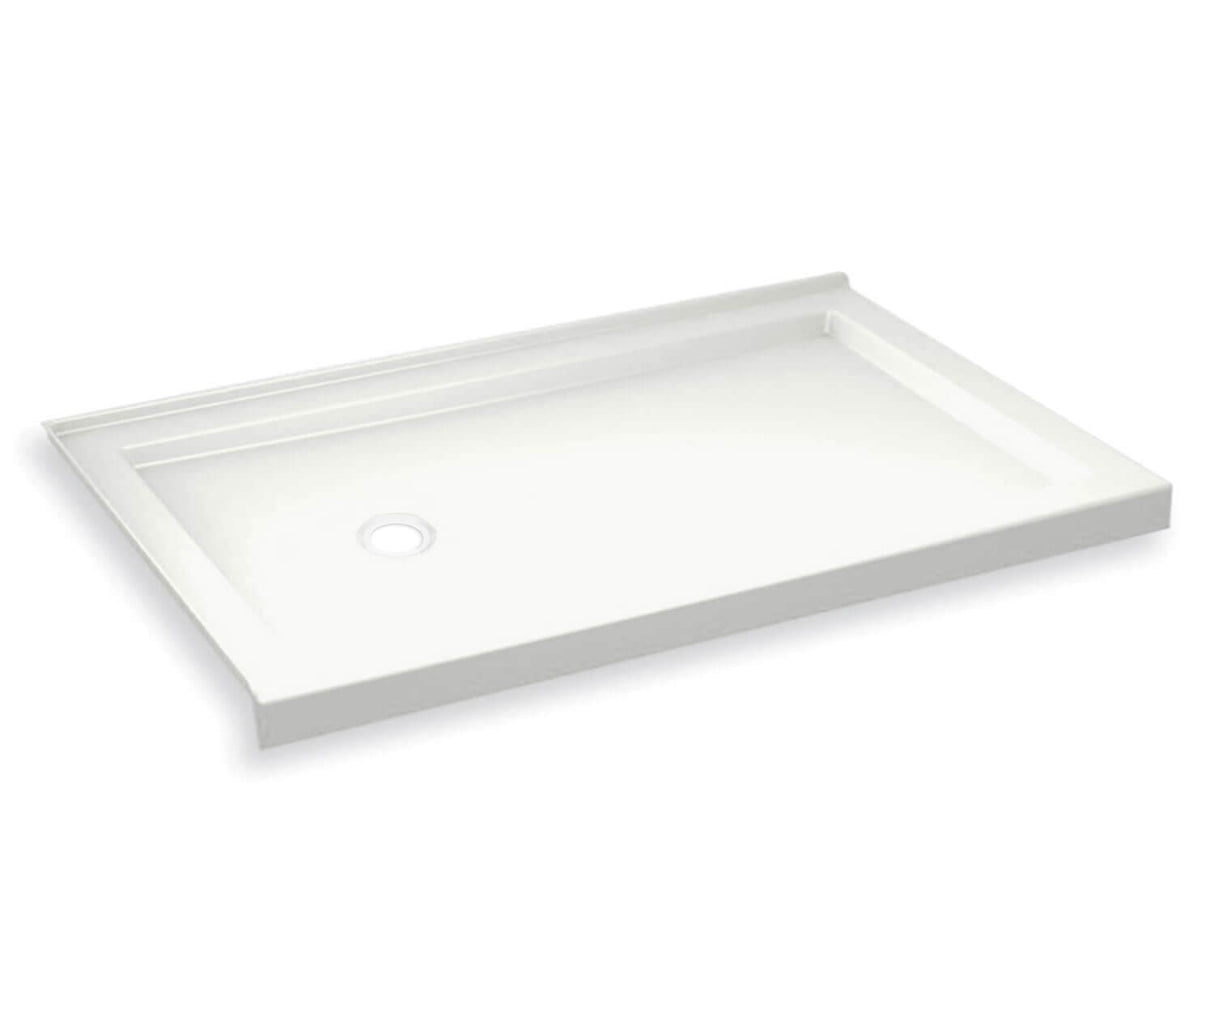 MAAX 410005-502-001-001 B3Round 6032 Acrylic Corner Left Shower Base in White with Left-Hand Drain